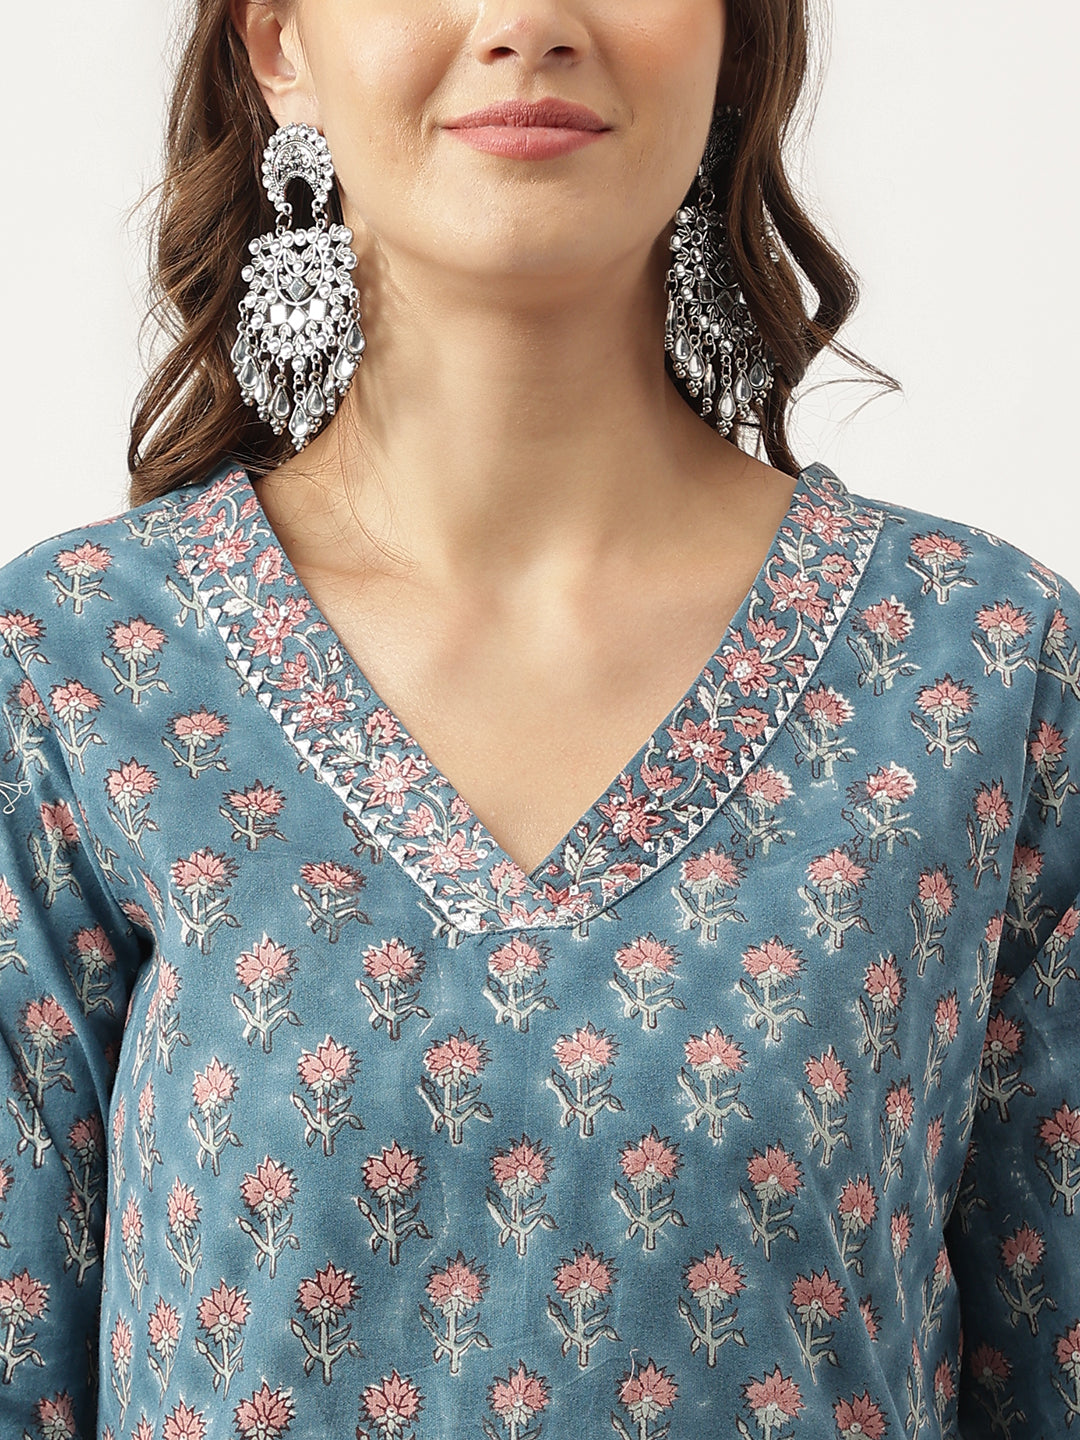 Divena Blue Floral Printed Cotton Embroidered kurta, Trouser with Dupatta